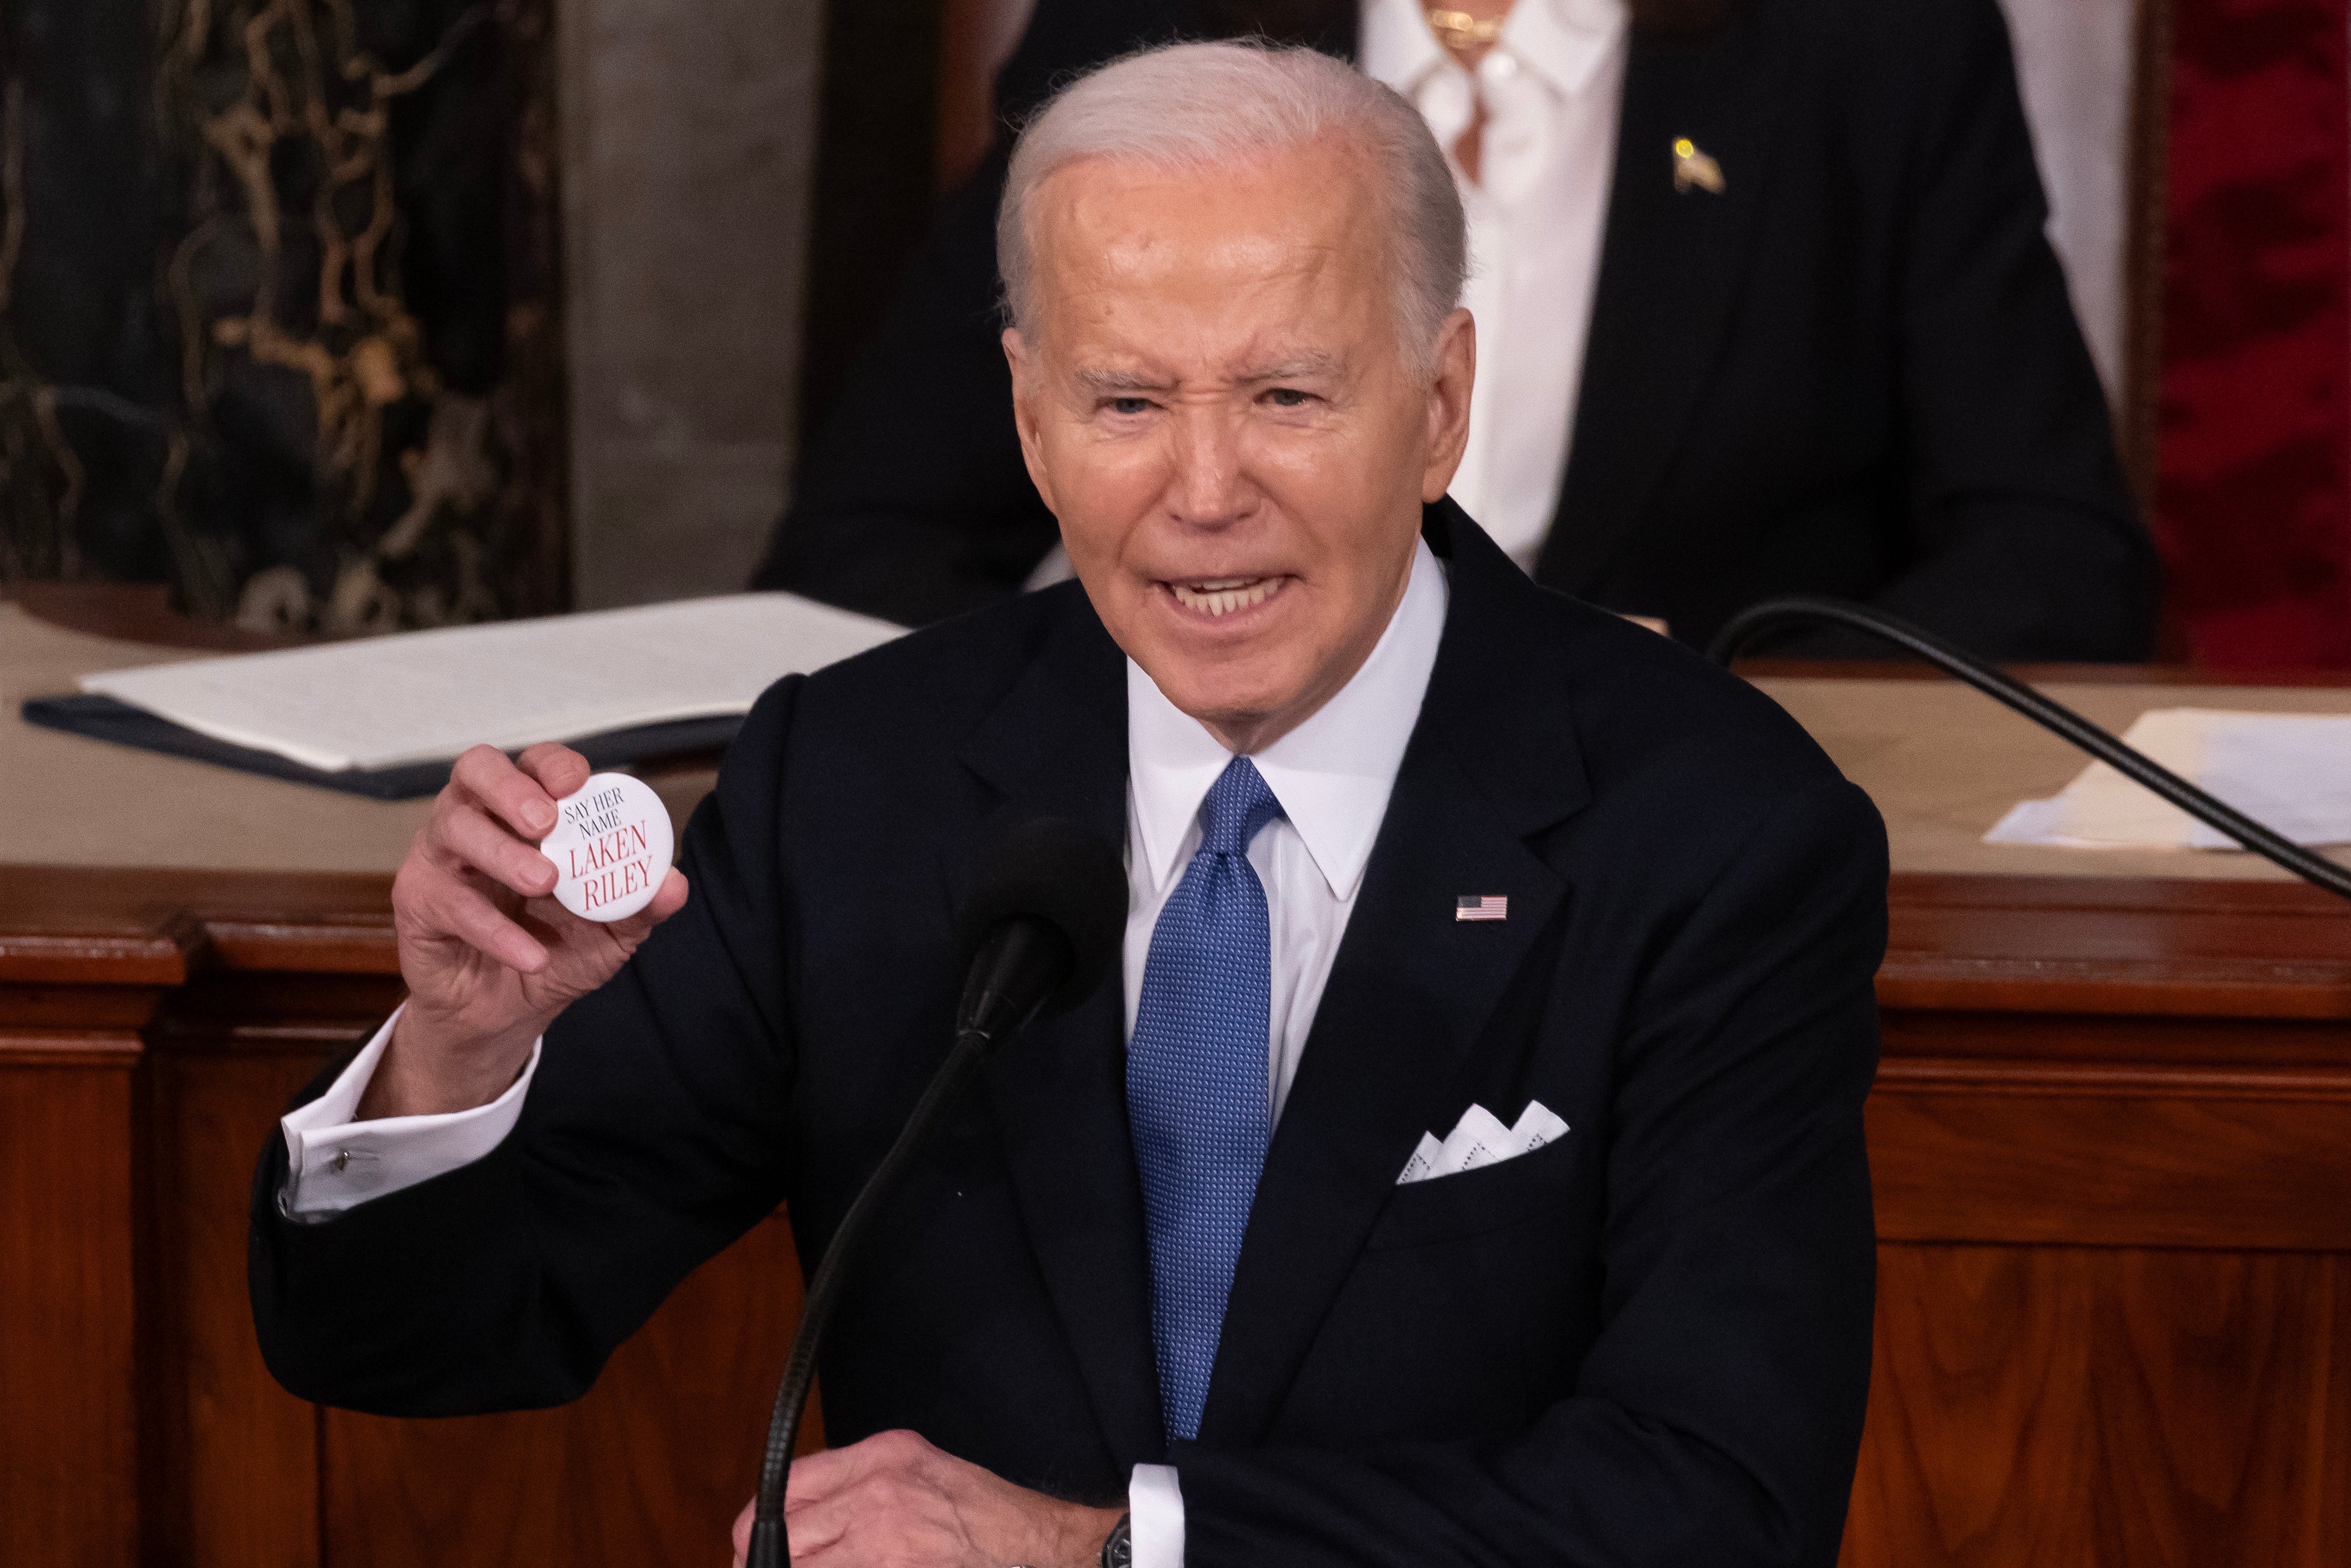 Biden holds up a badge referring to Georgia student Laken Riley